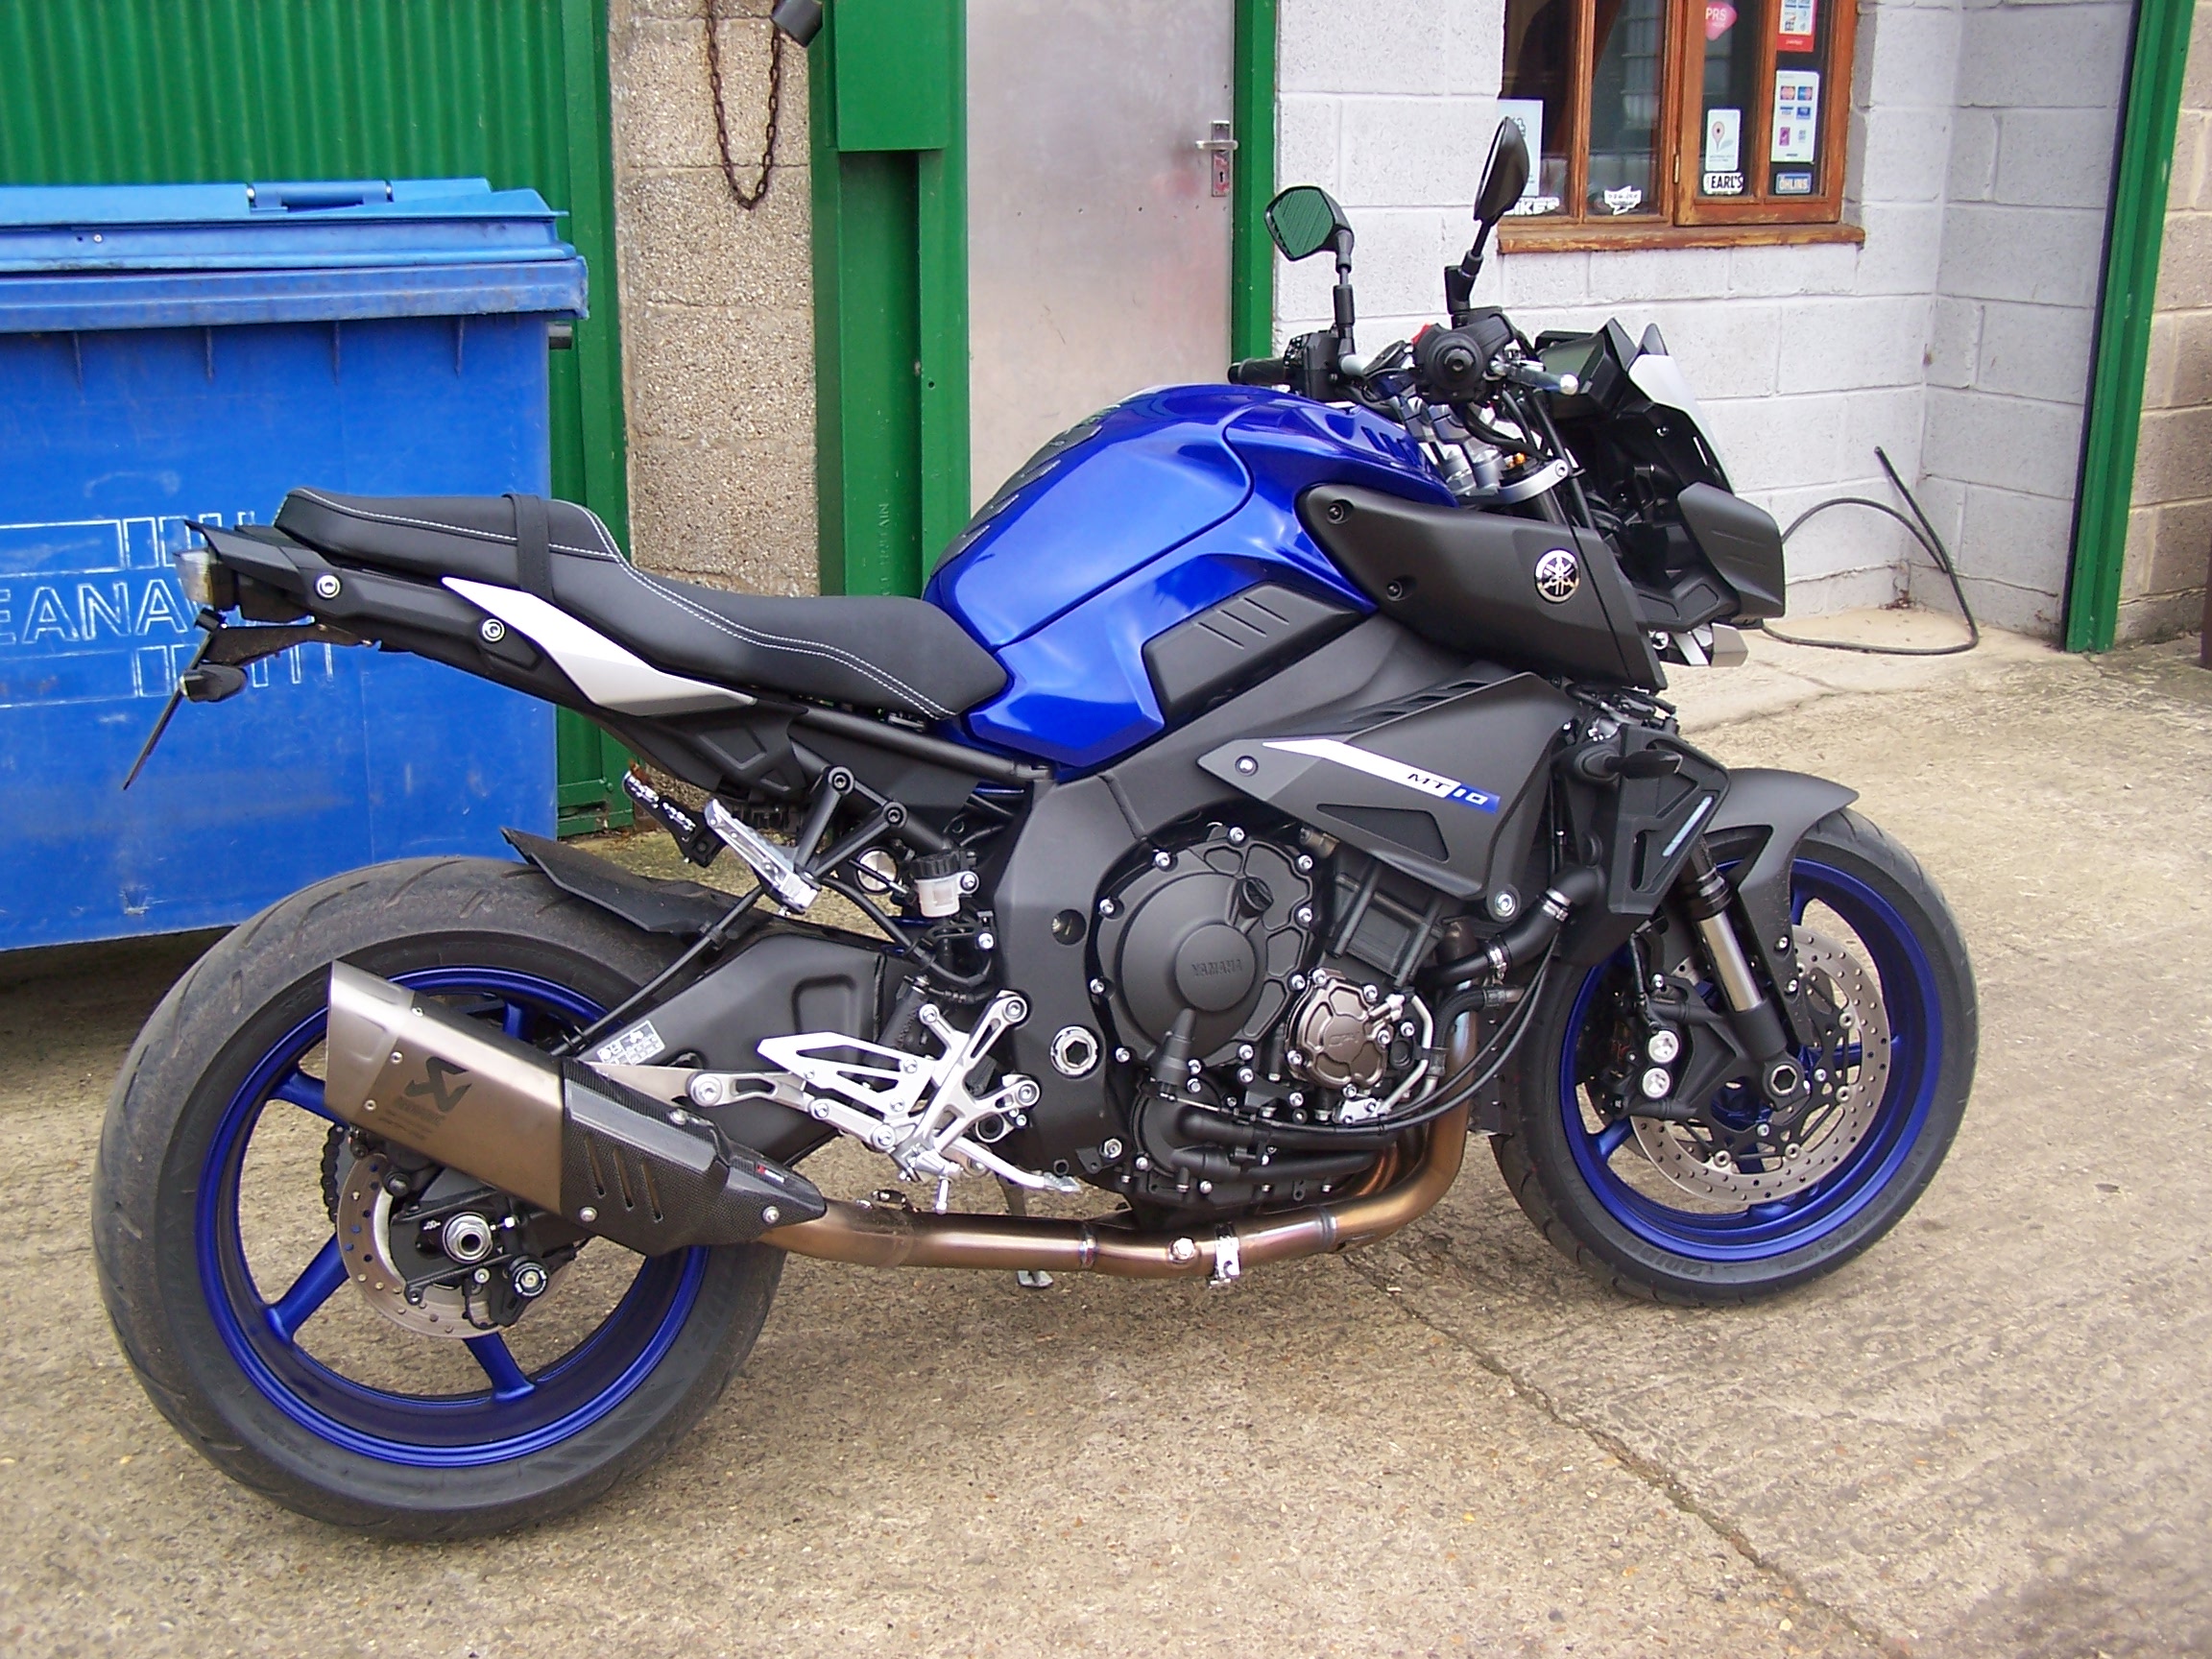 Yamaha MT-10 ECU remap – they’re not easy, but we’ve cracked ‘em. And the result transforms the feel of the bike…